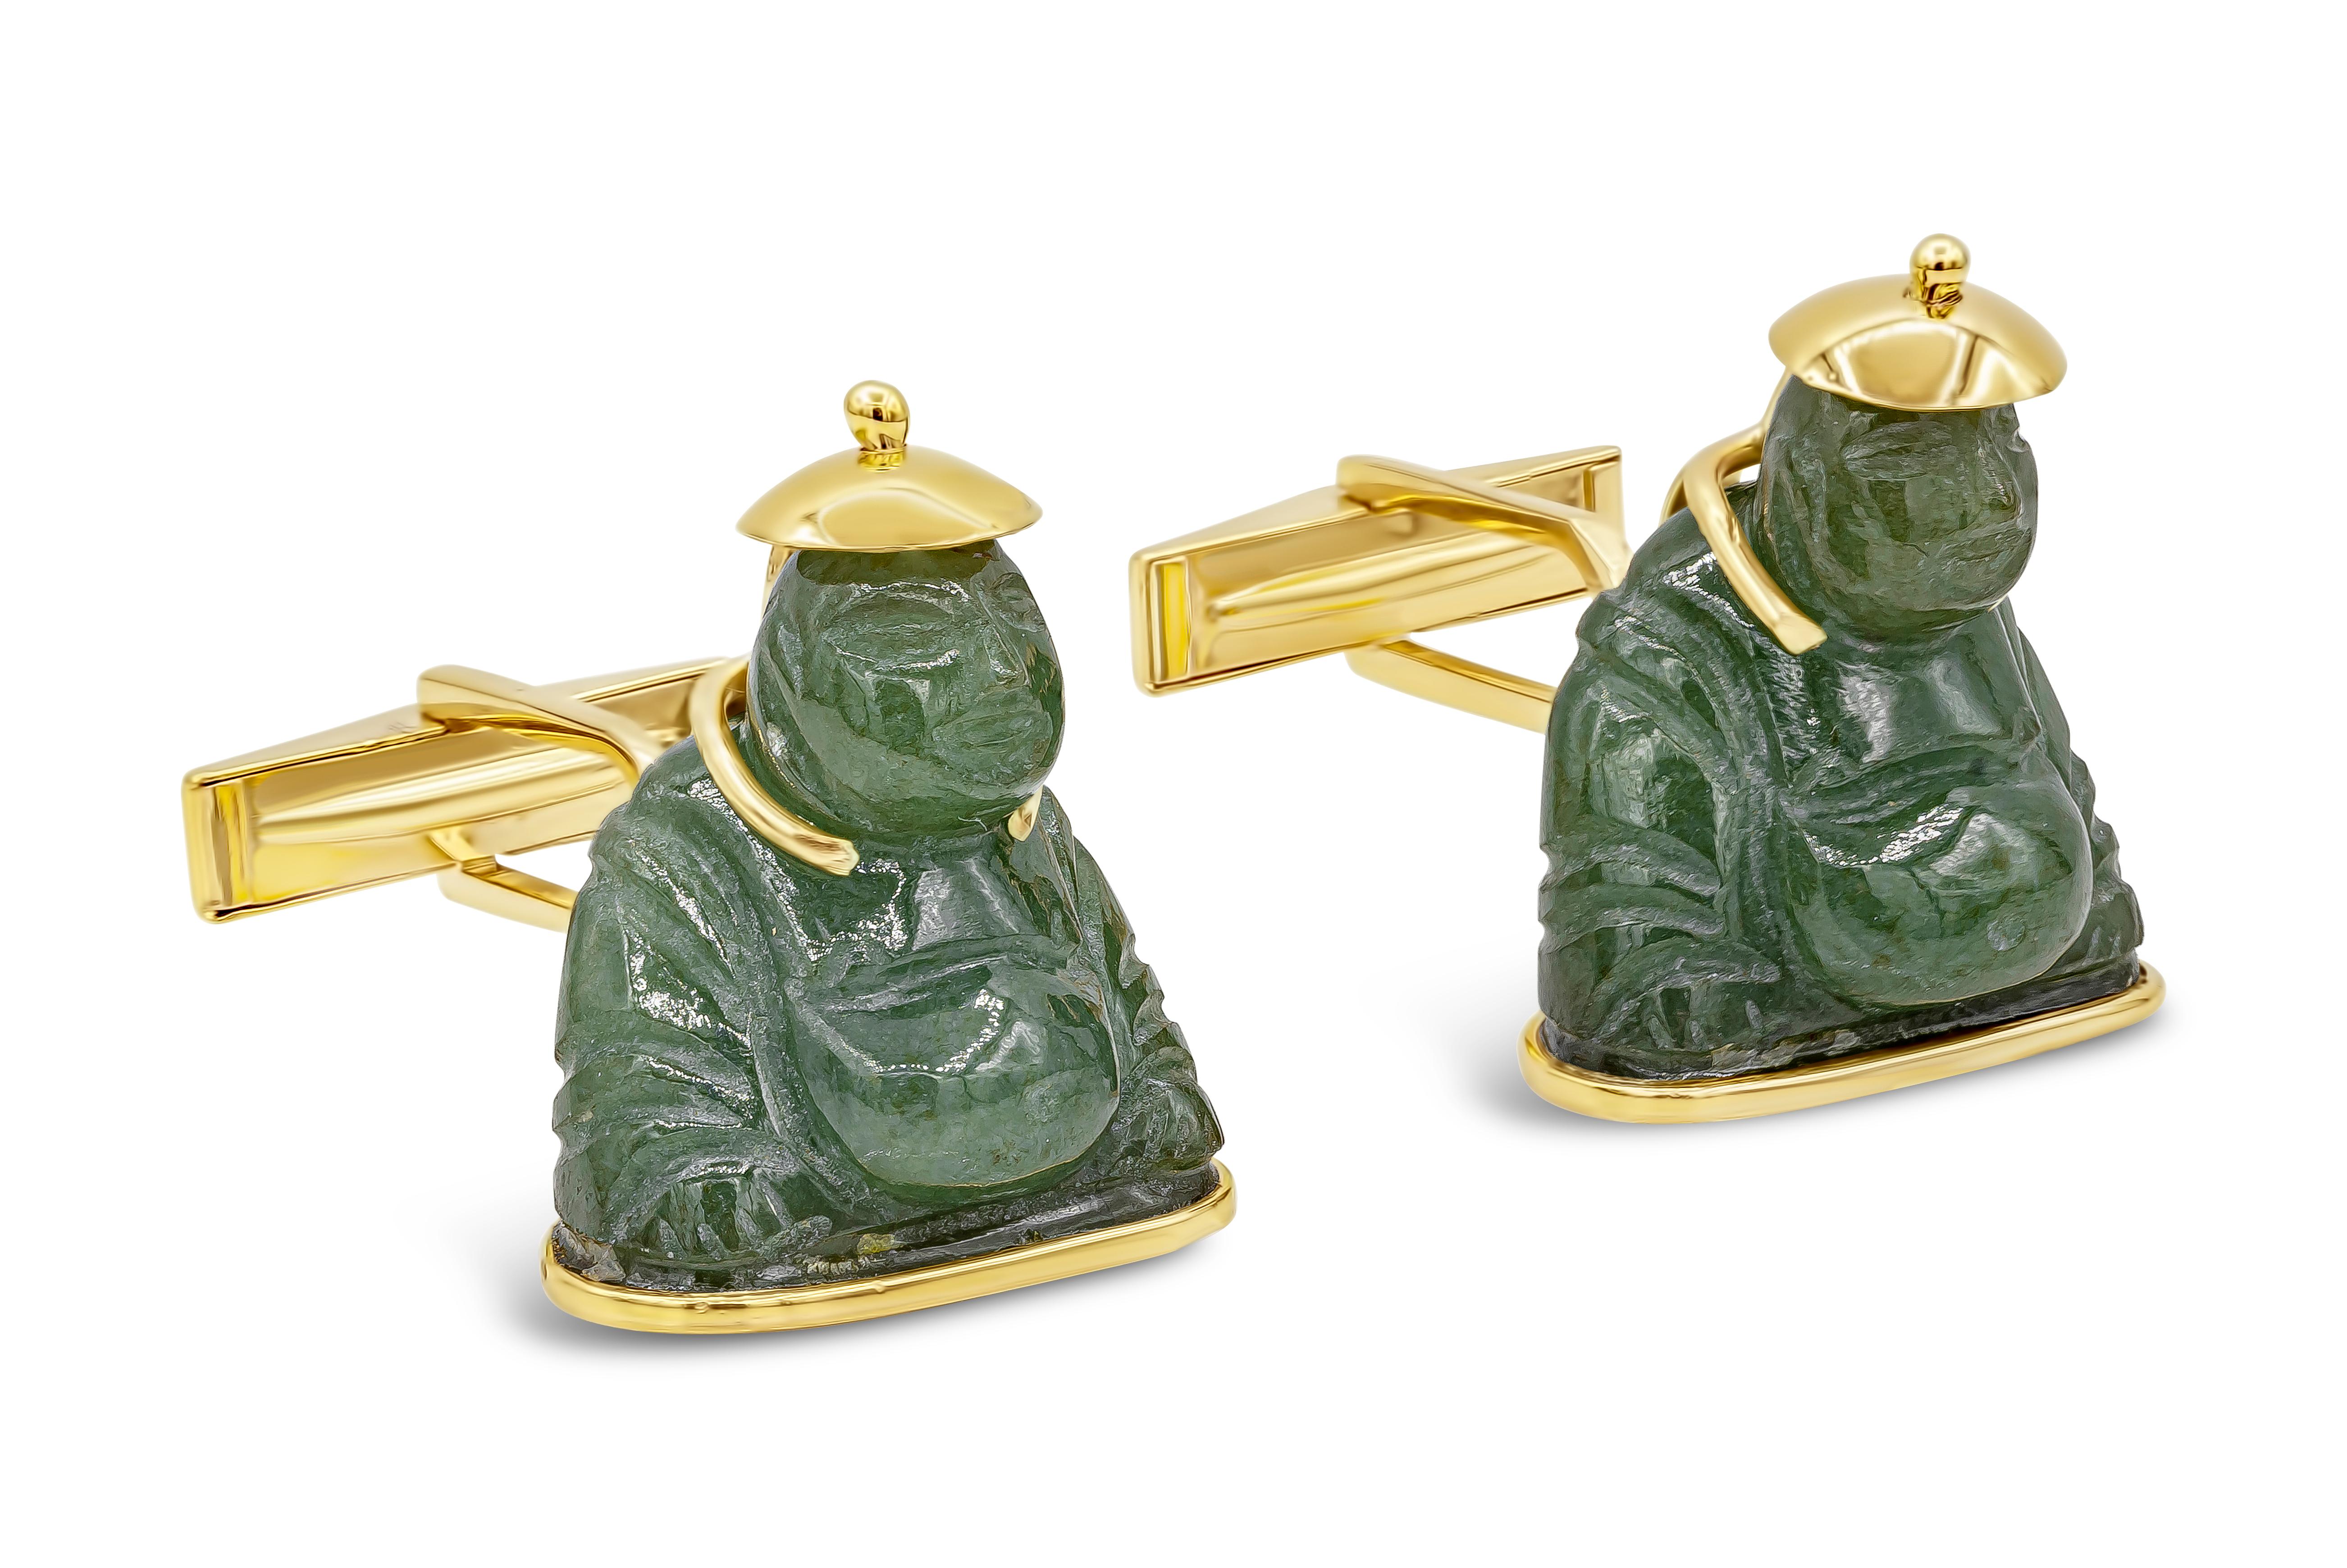 A unique pair of cufflinks showcasing an intricately-designed buddha made of Nephrite Jade. Set in a 14K Yellow Gold mounting with a whale back closure.

